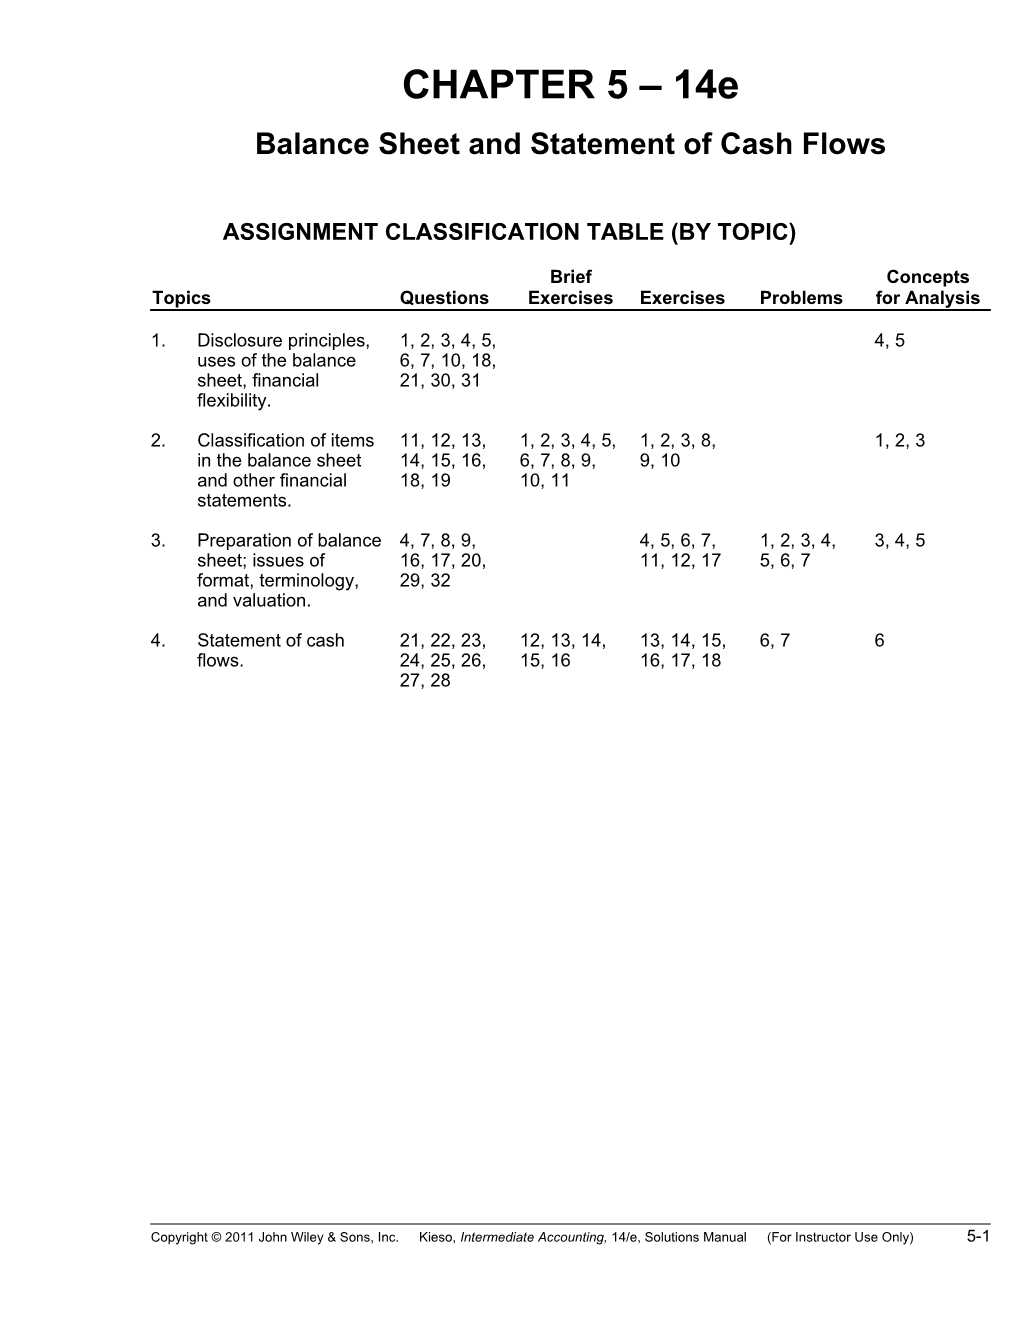 Balance Sheet and Statement of Cash Flows s1